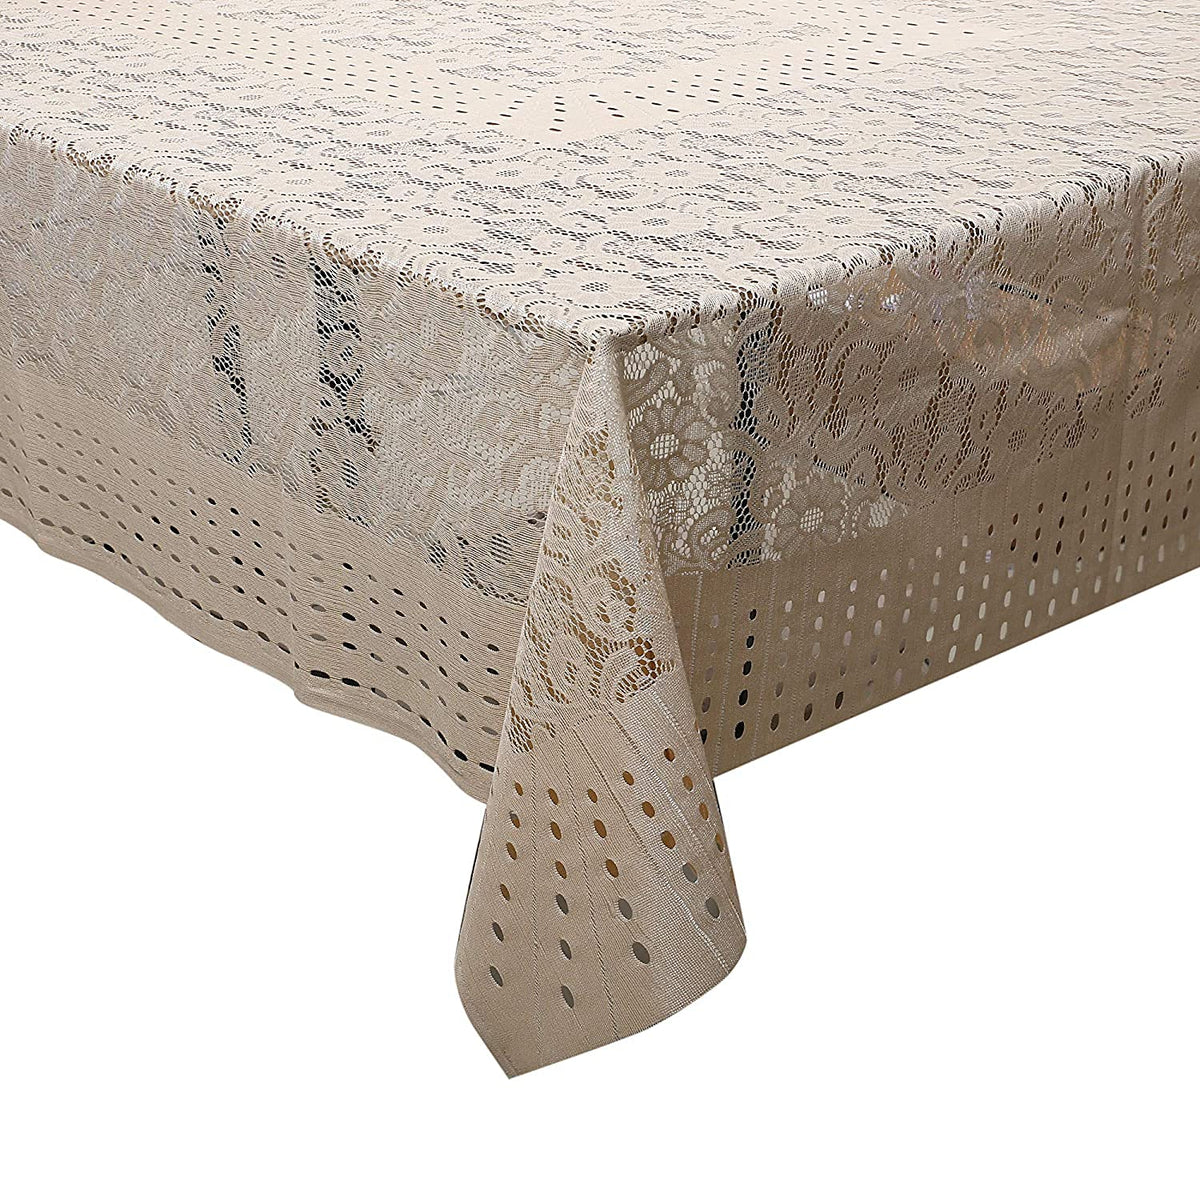 Kuber Industries Cotton Floral Design Shining Cotton 6 Seater Dining Table Cover 60x90 Inches (Gold)-CTKTC32471,Rectangular,1 Piece